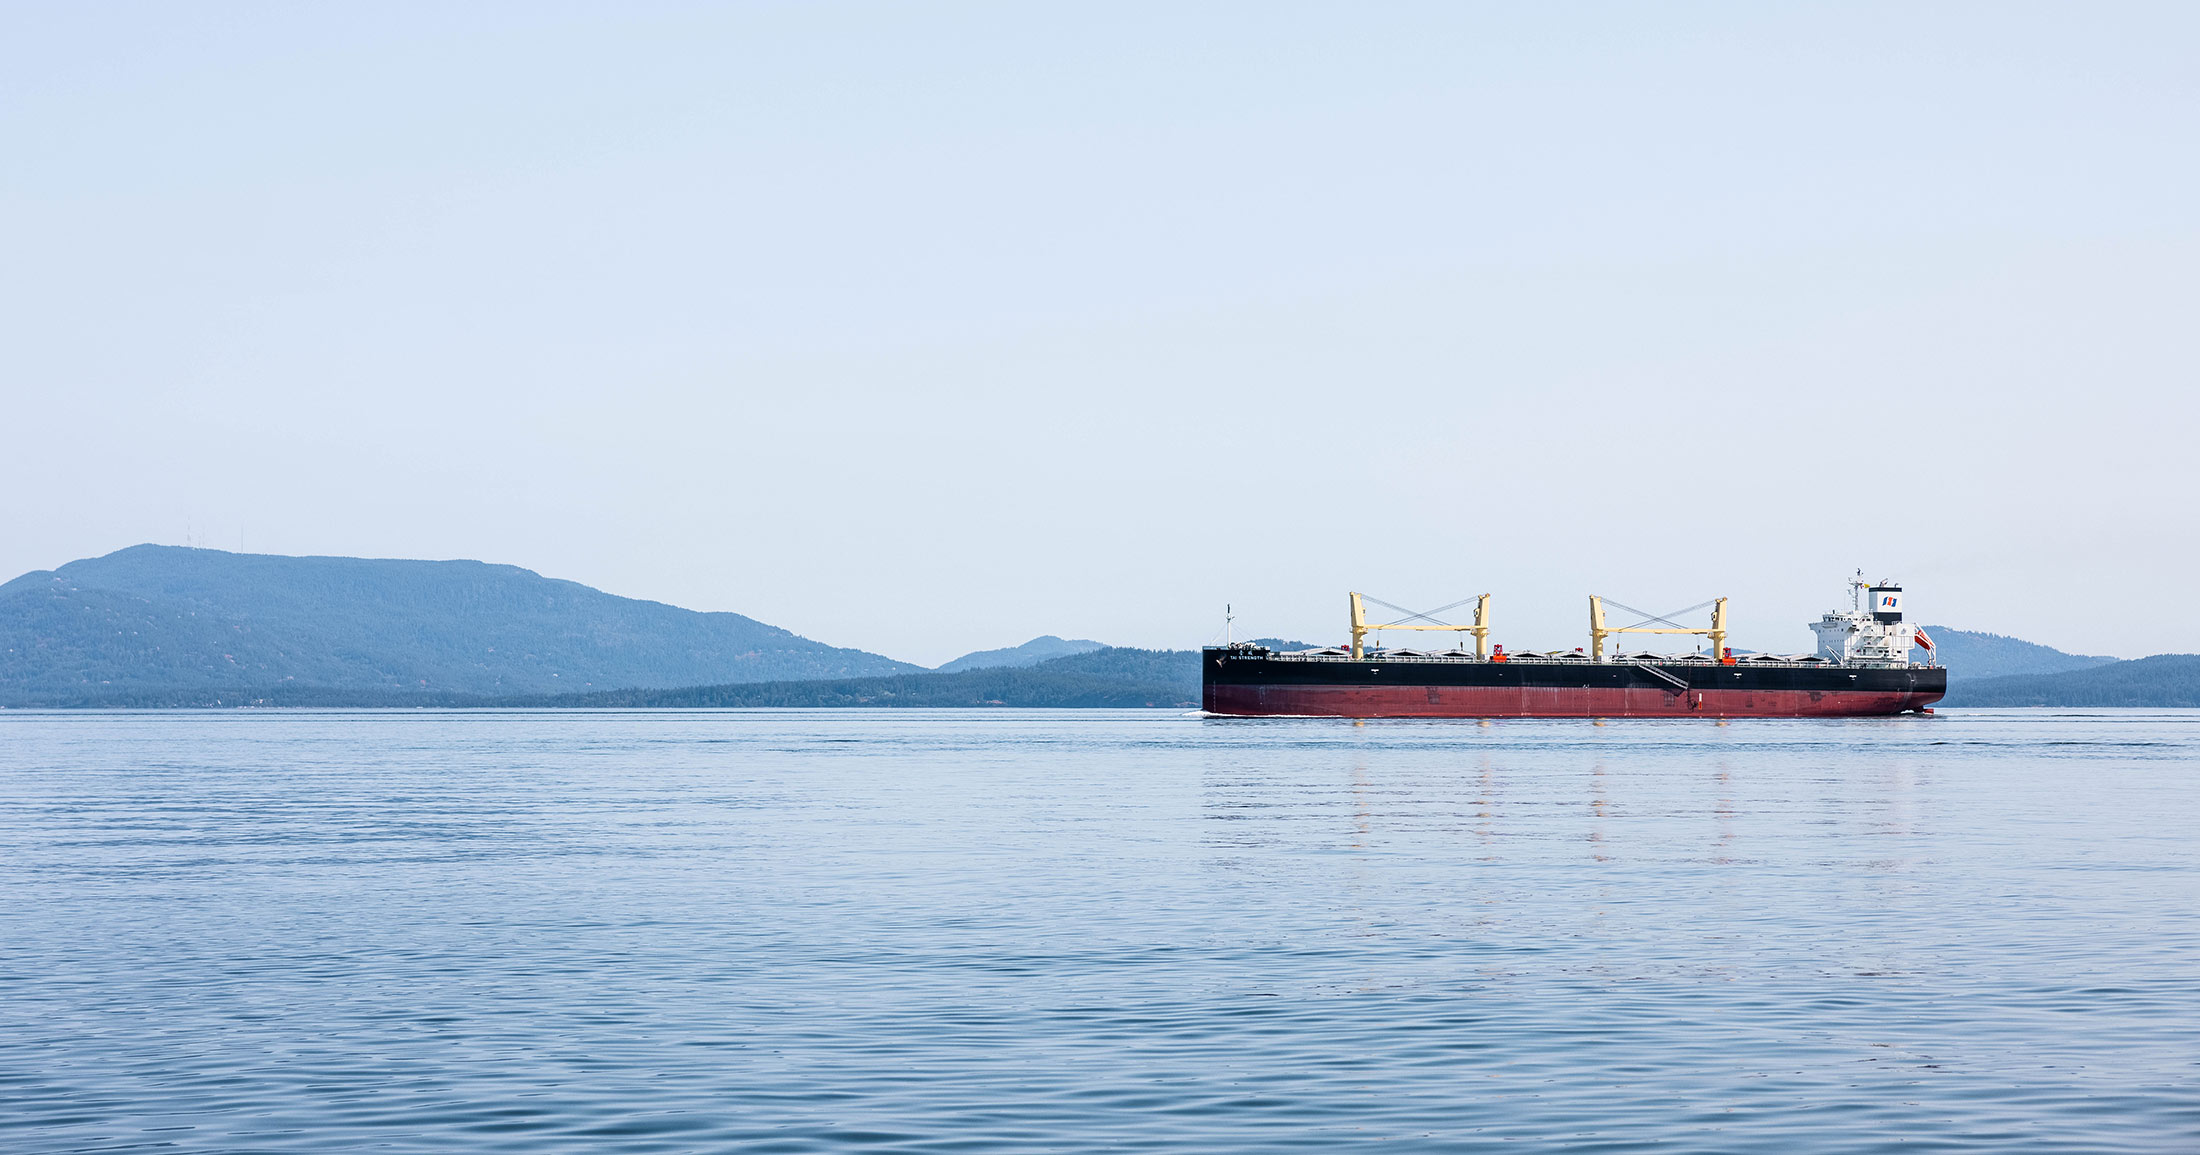 An oil tanker at rest off the BC coast.